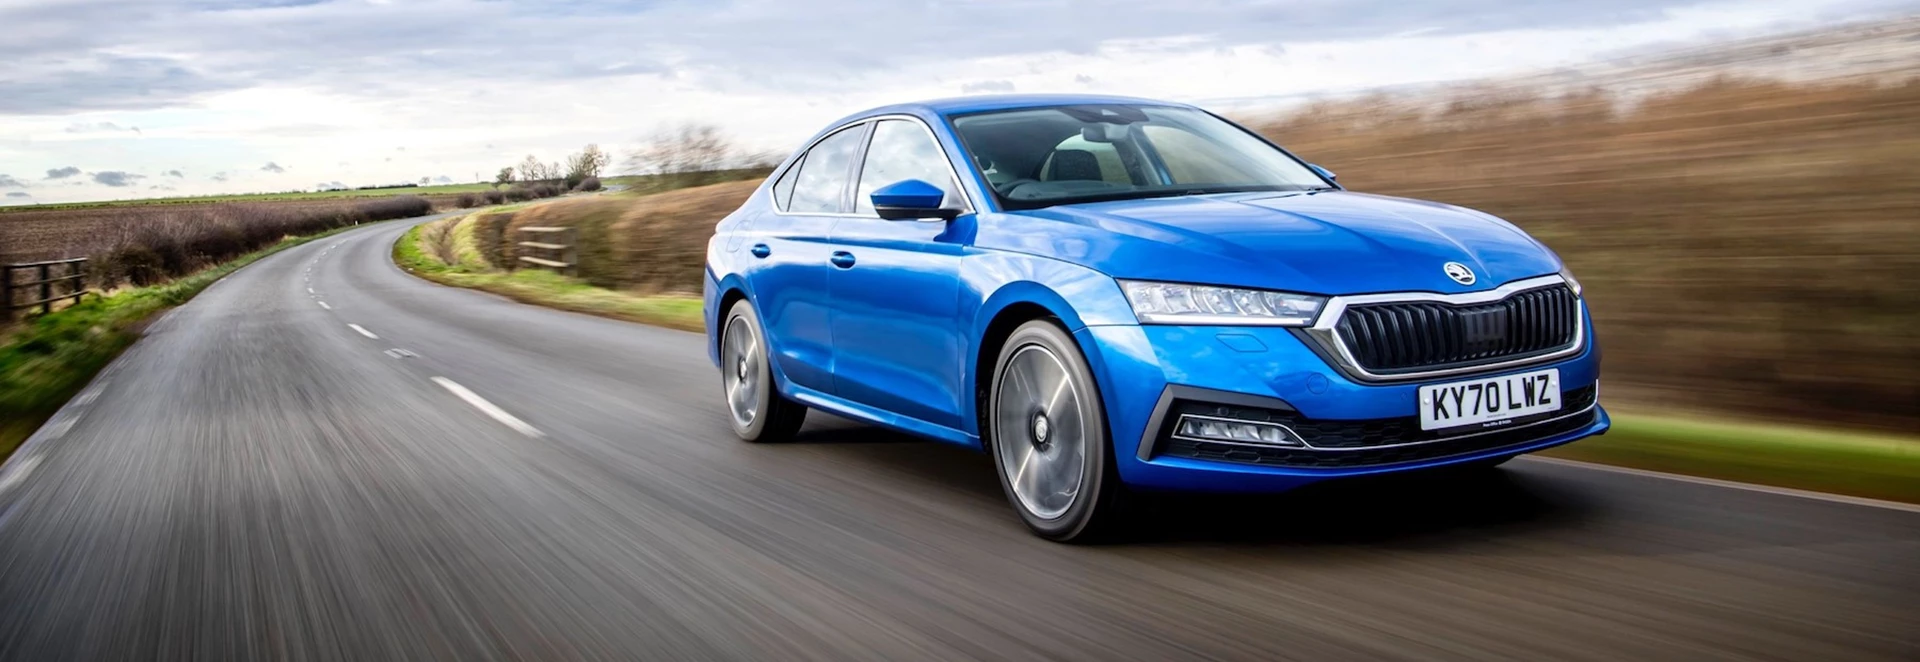 Skoda Octavia iV: Here’s what you need to know 